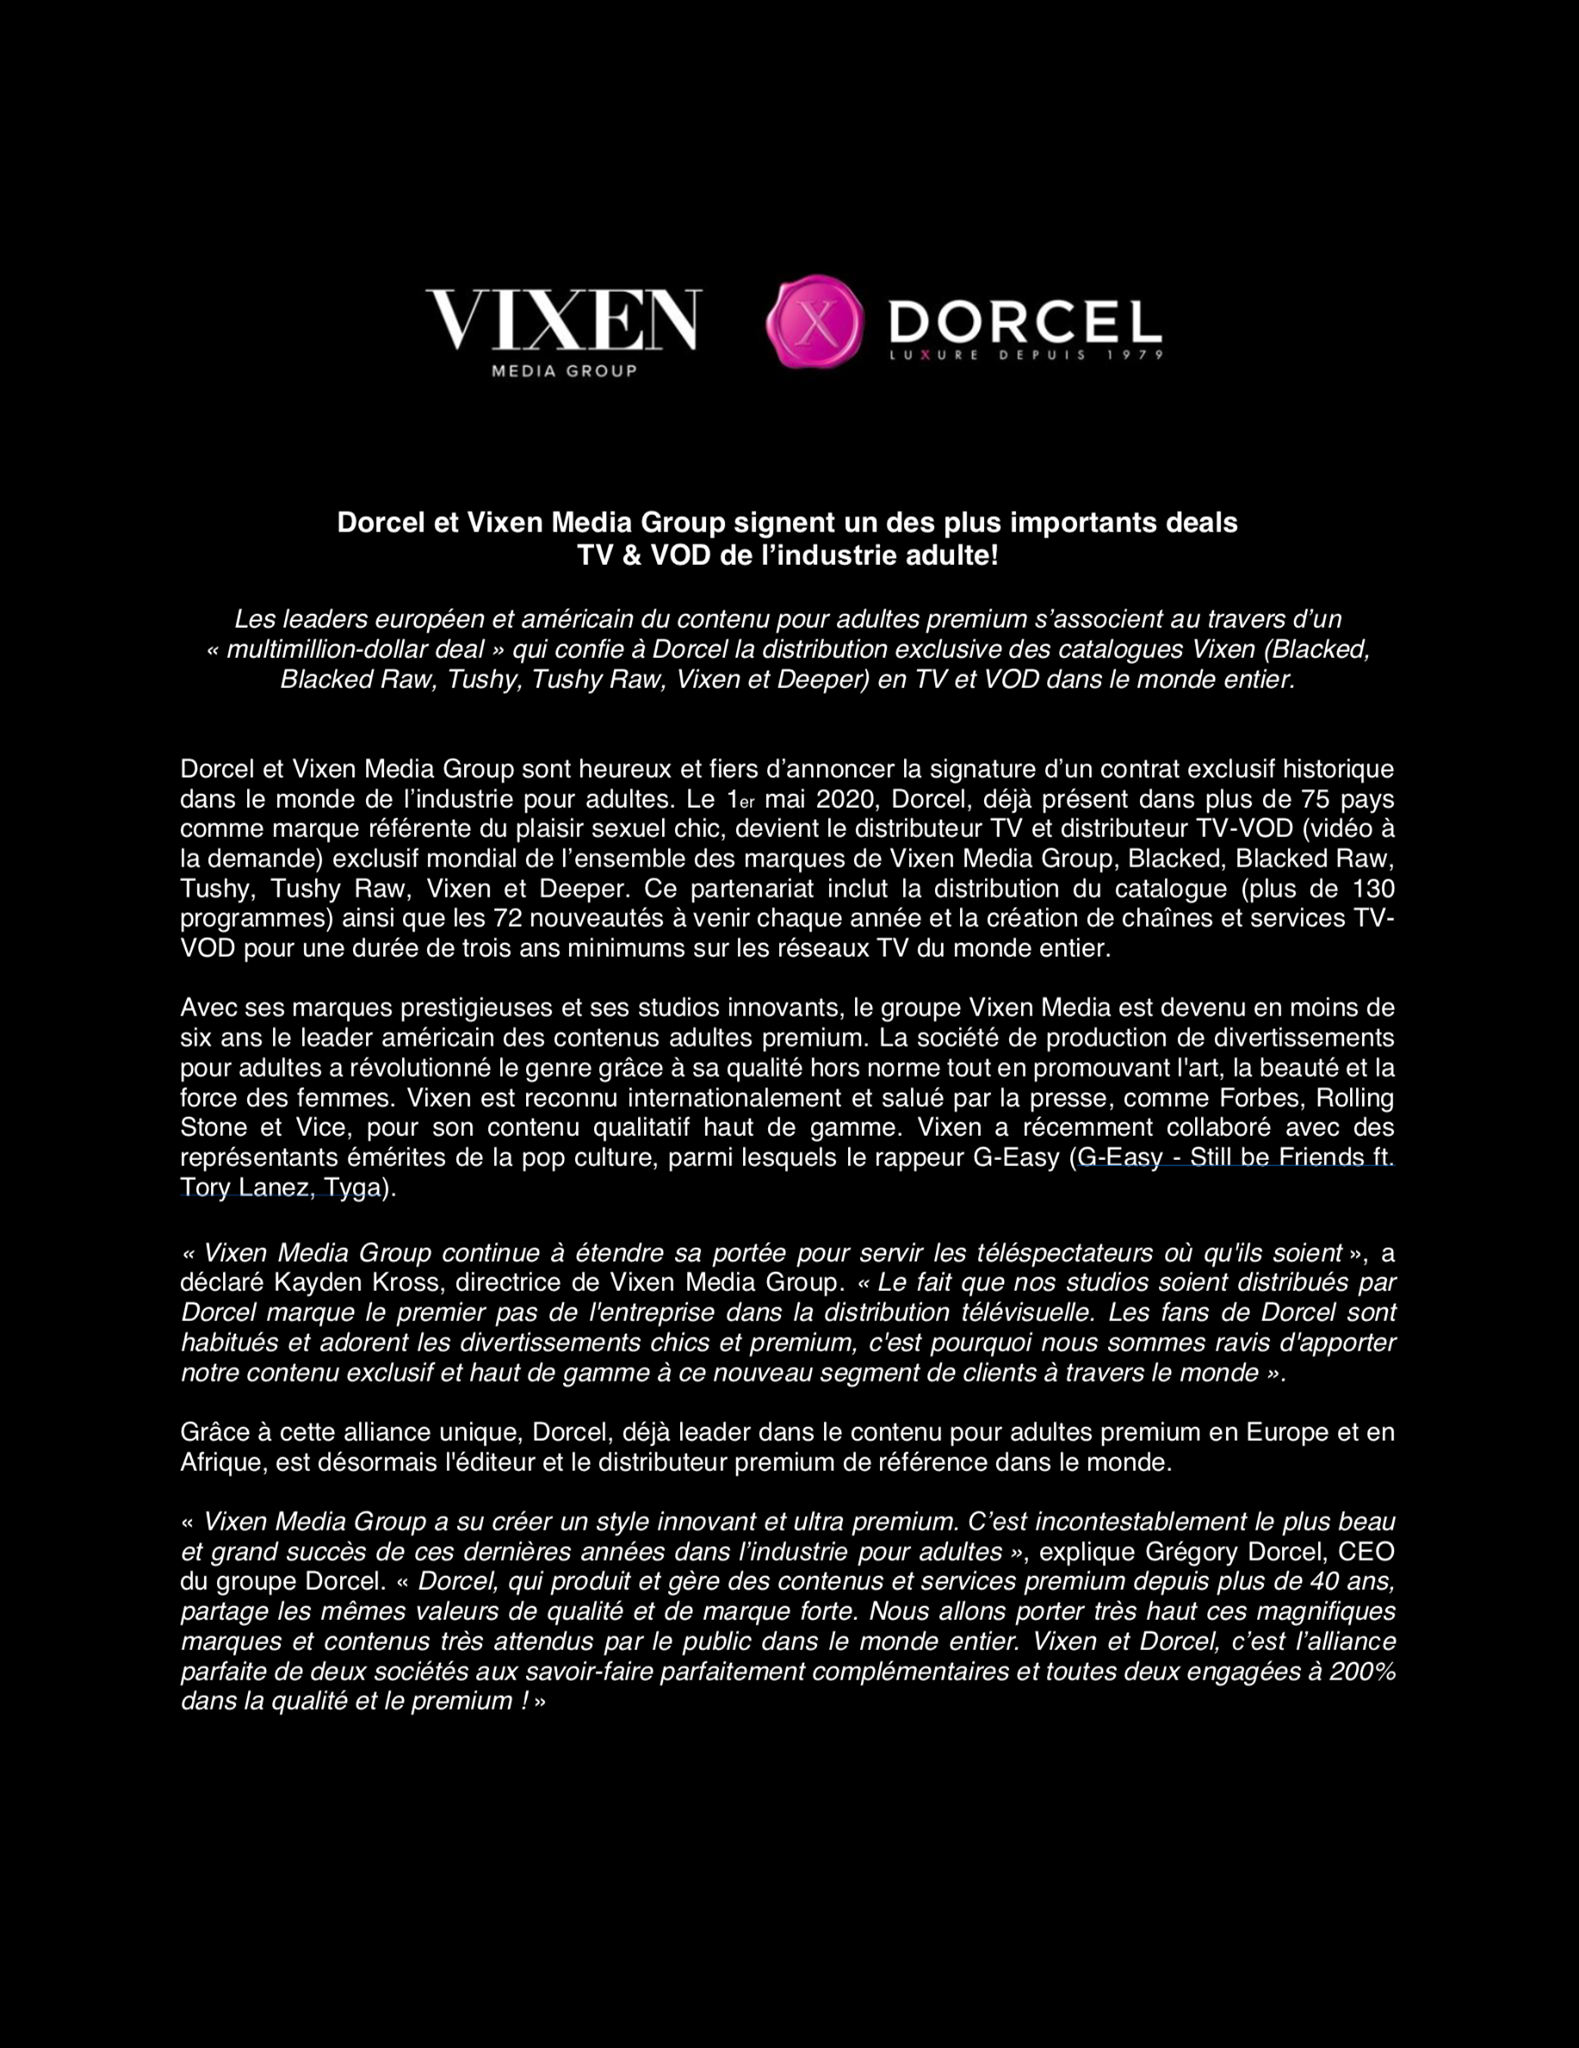 How our week so far ? #FromBigToBigger thanks to a historic deal between Dorcel & Vixen Media Group (Blacked, Blacked Raw, Tushy, Tushy Raw, Vixen…